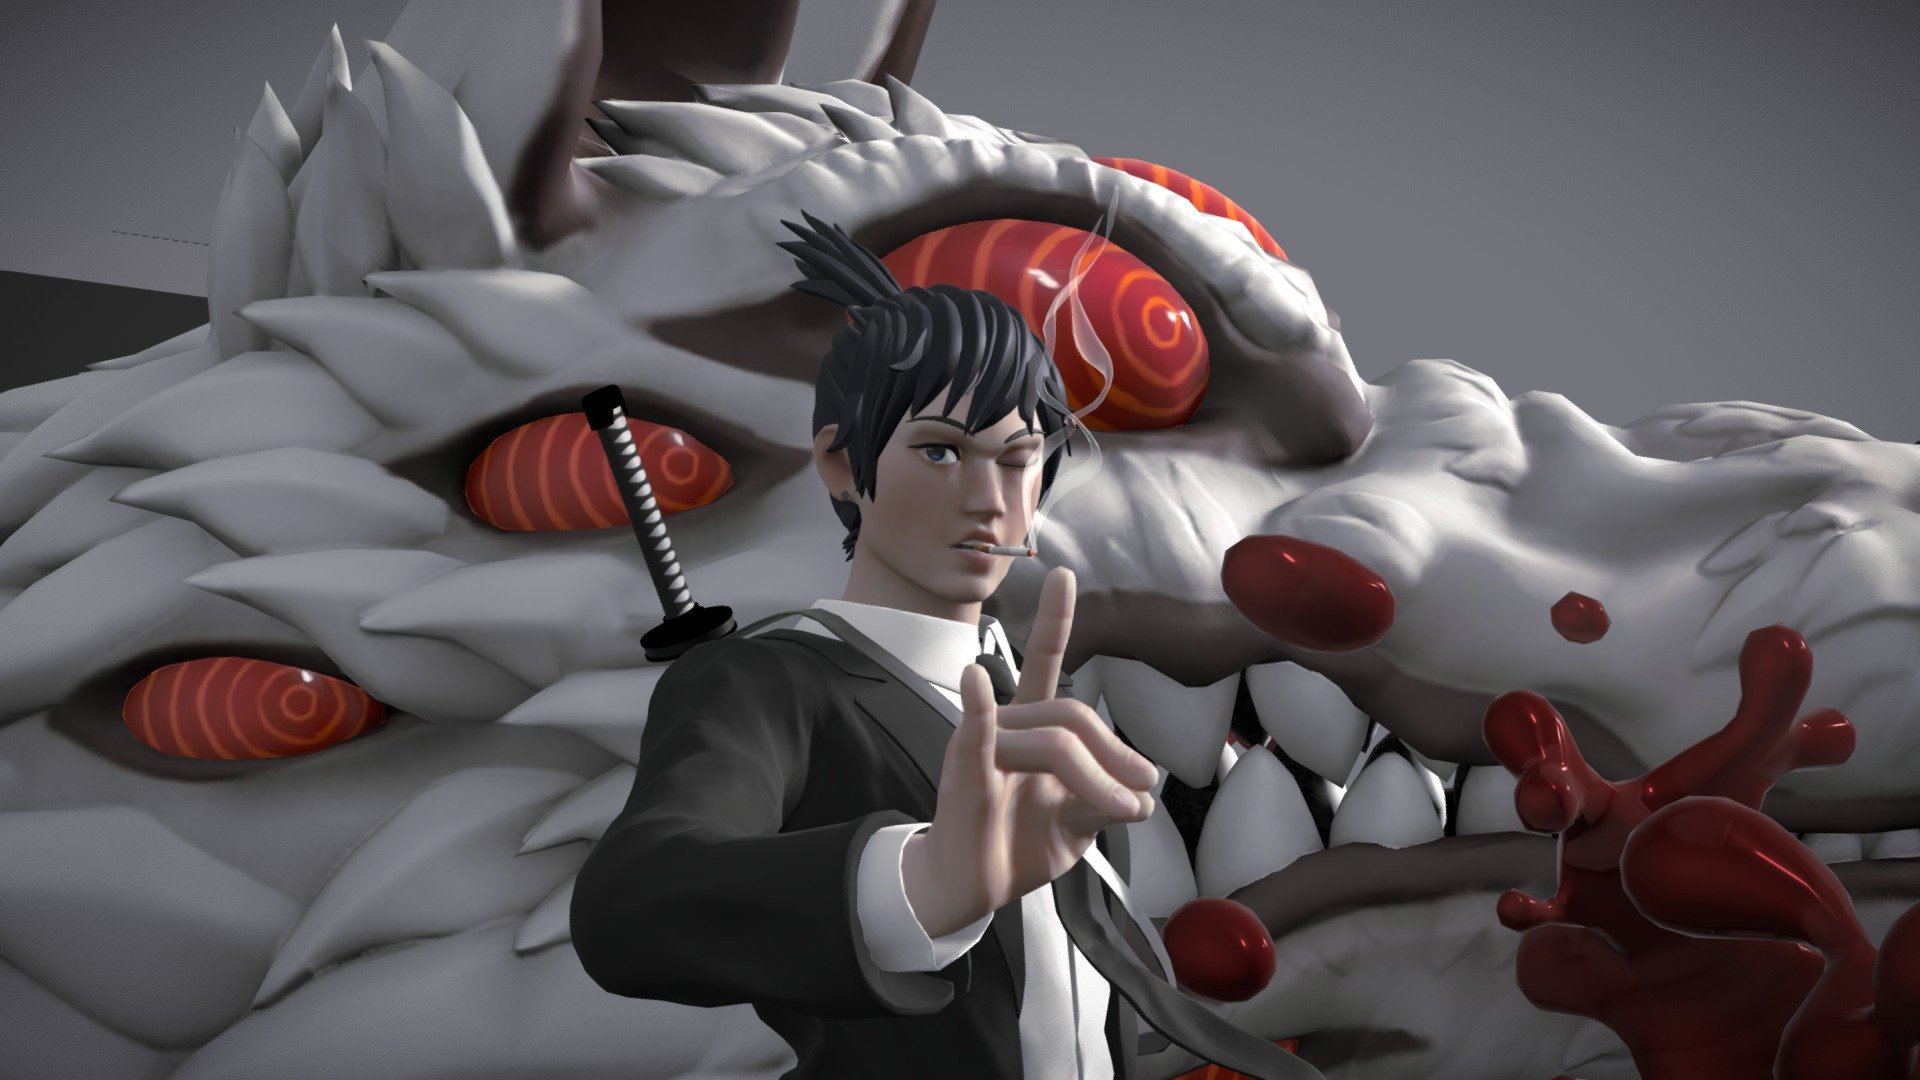 Feel the power and style of Aki and his fox demon with this amazing stylized model. Carefully designed and crafted to the smallest detail, this model invites you into the exciting world of the &lsquo;Chainsaw Man' anime. With attractive design and high quality, it is the perfect choice for anime and modeling enthusiasts

Some Renders



 - Aki Hayakawa. Chainsaw Man. Fan Art - 3D model by Wnight 3d model